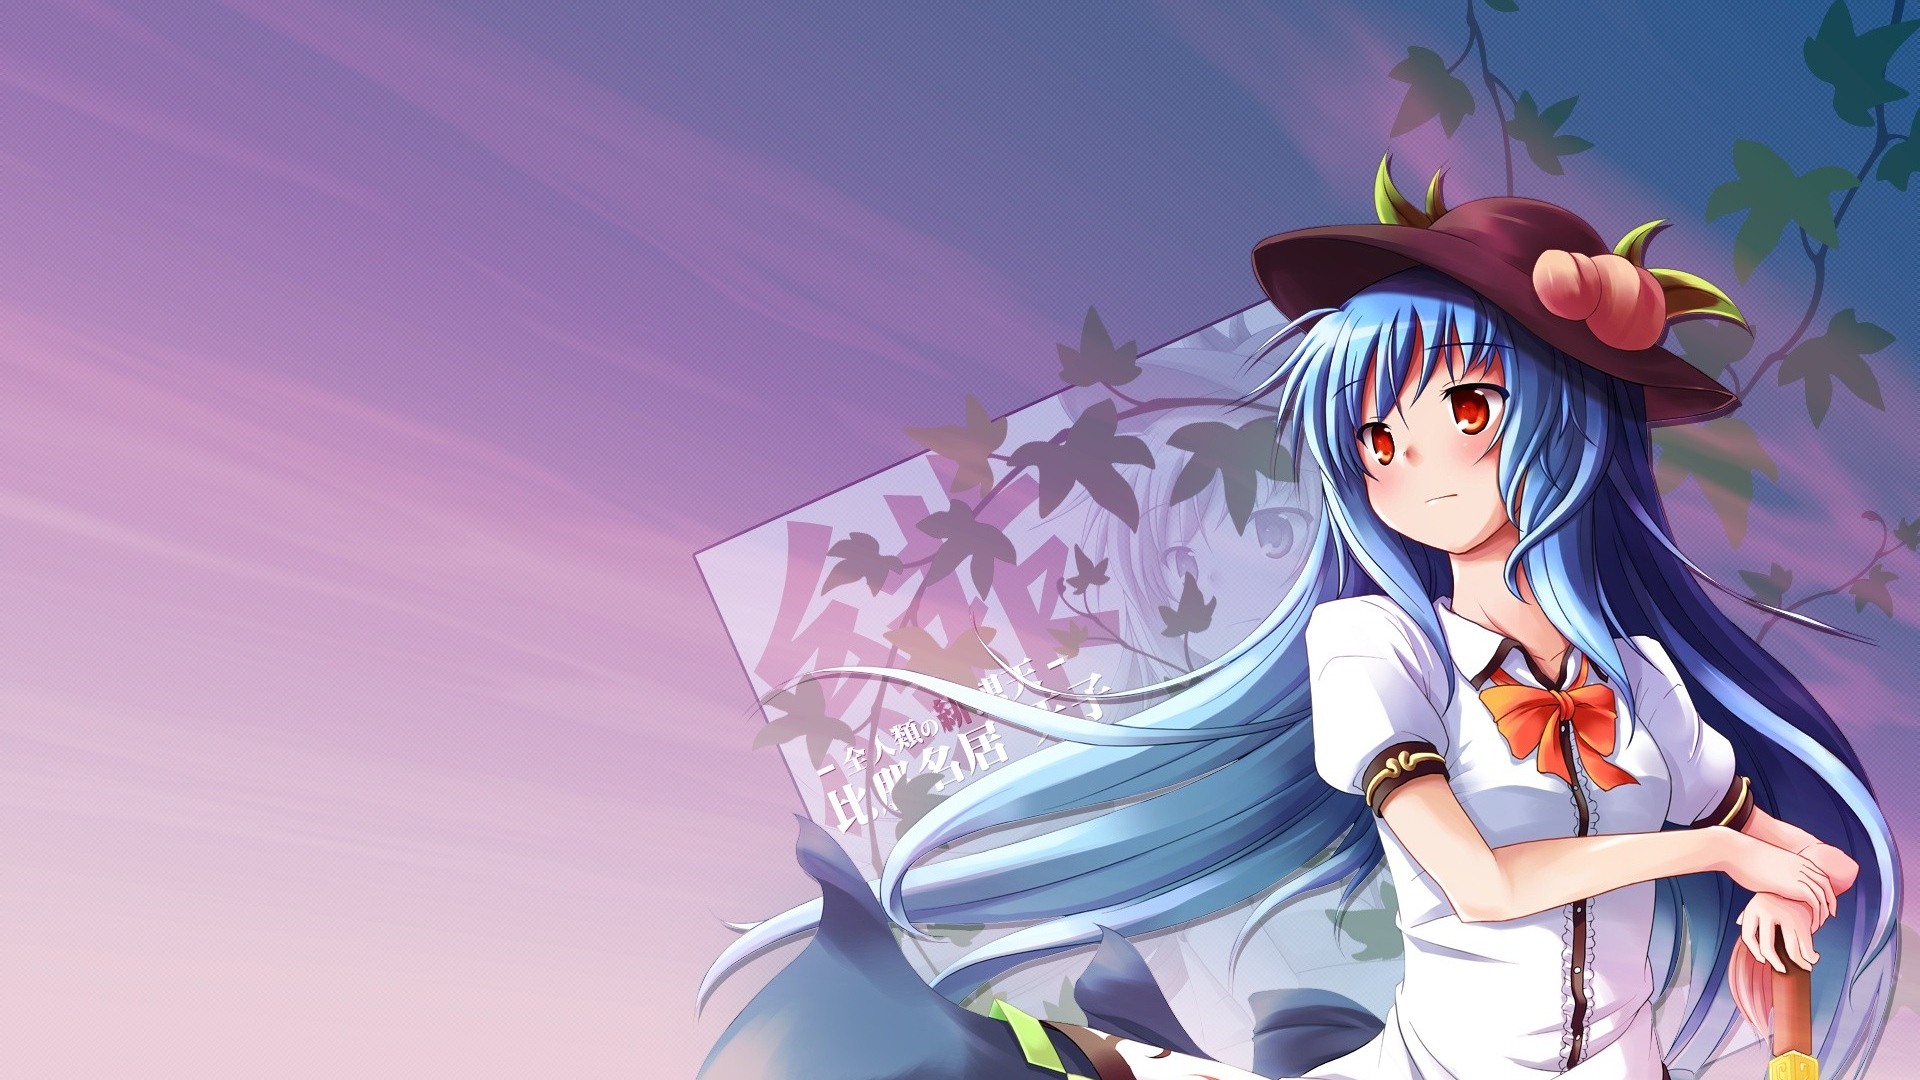 Touhou Project caricature HD wallpapers #16 - 1920x1080